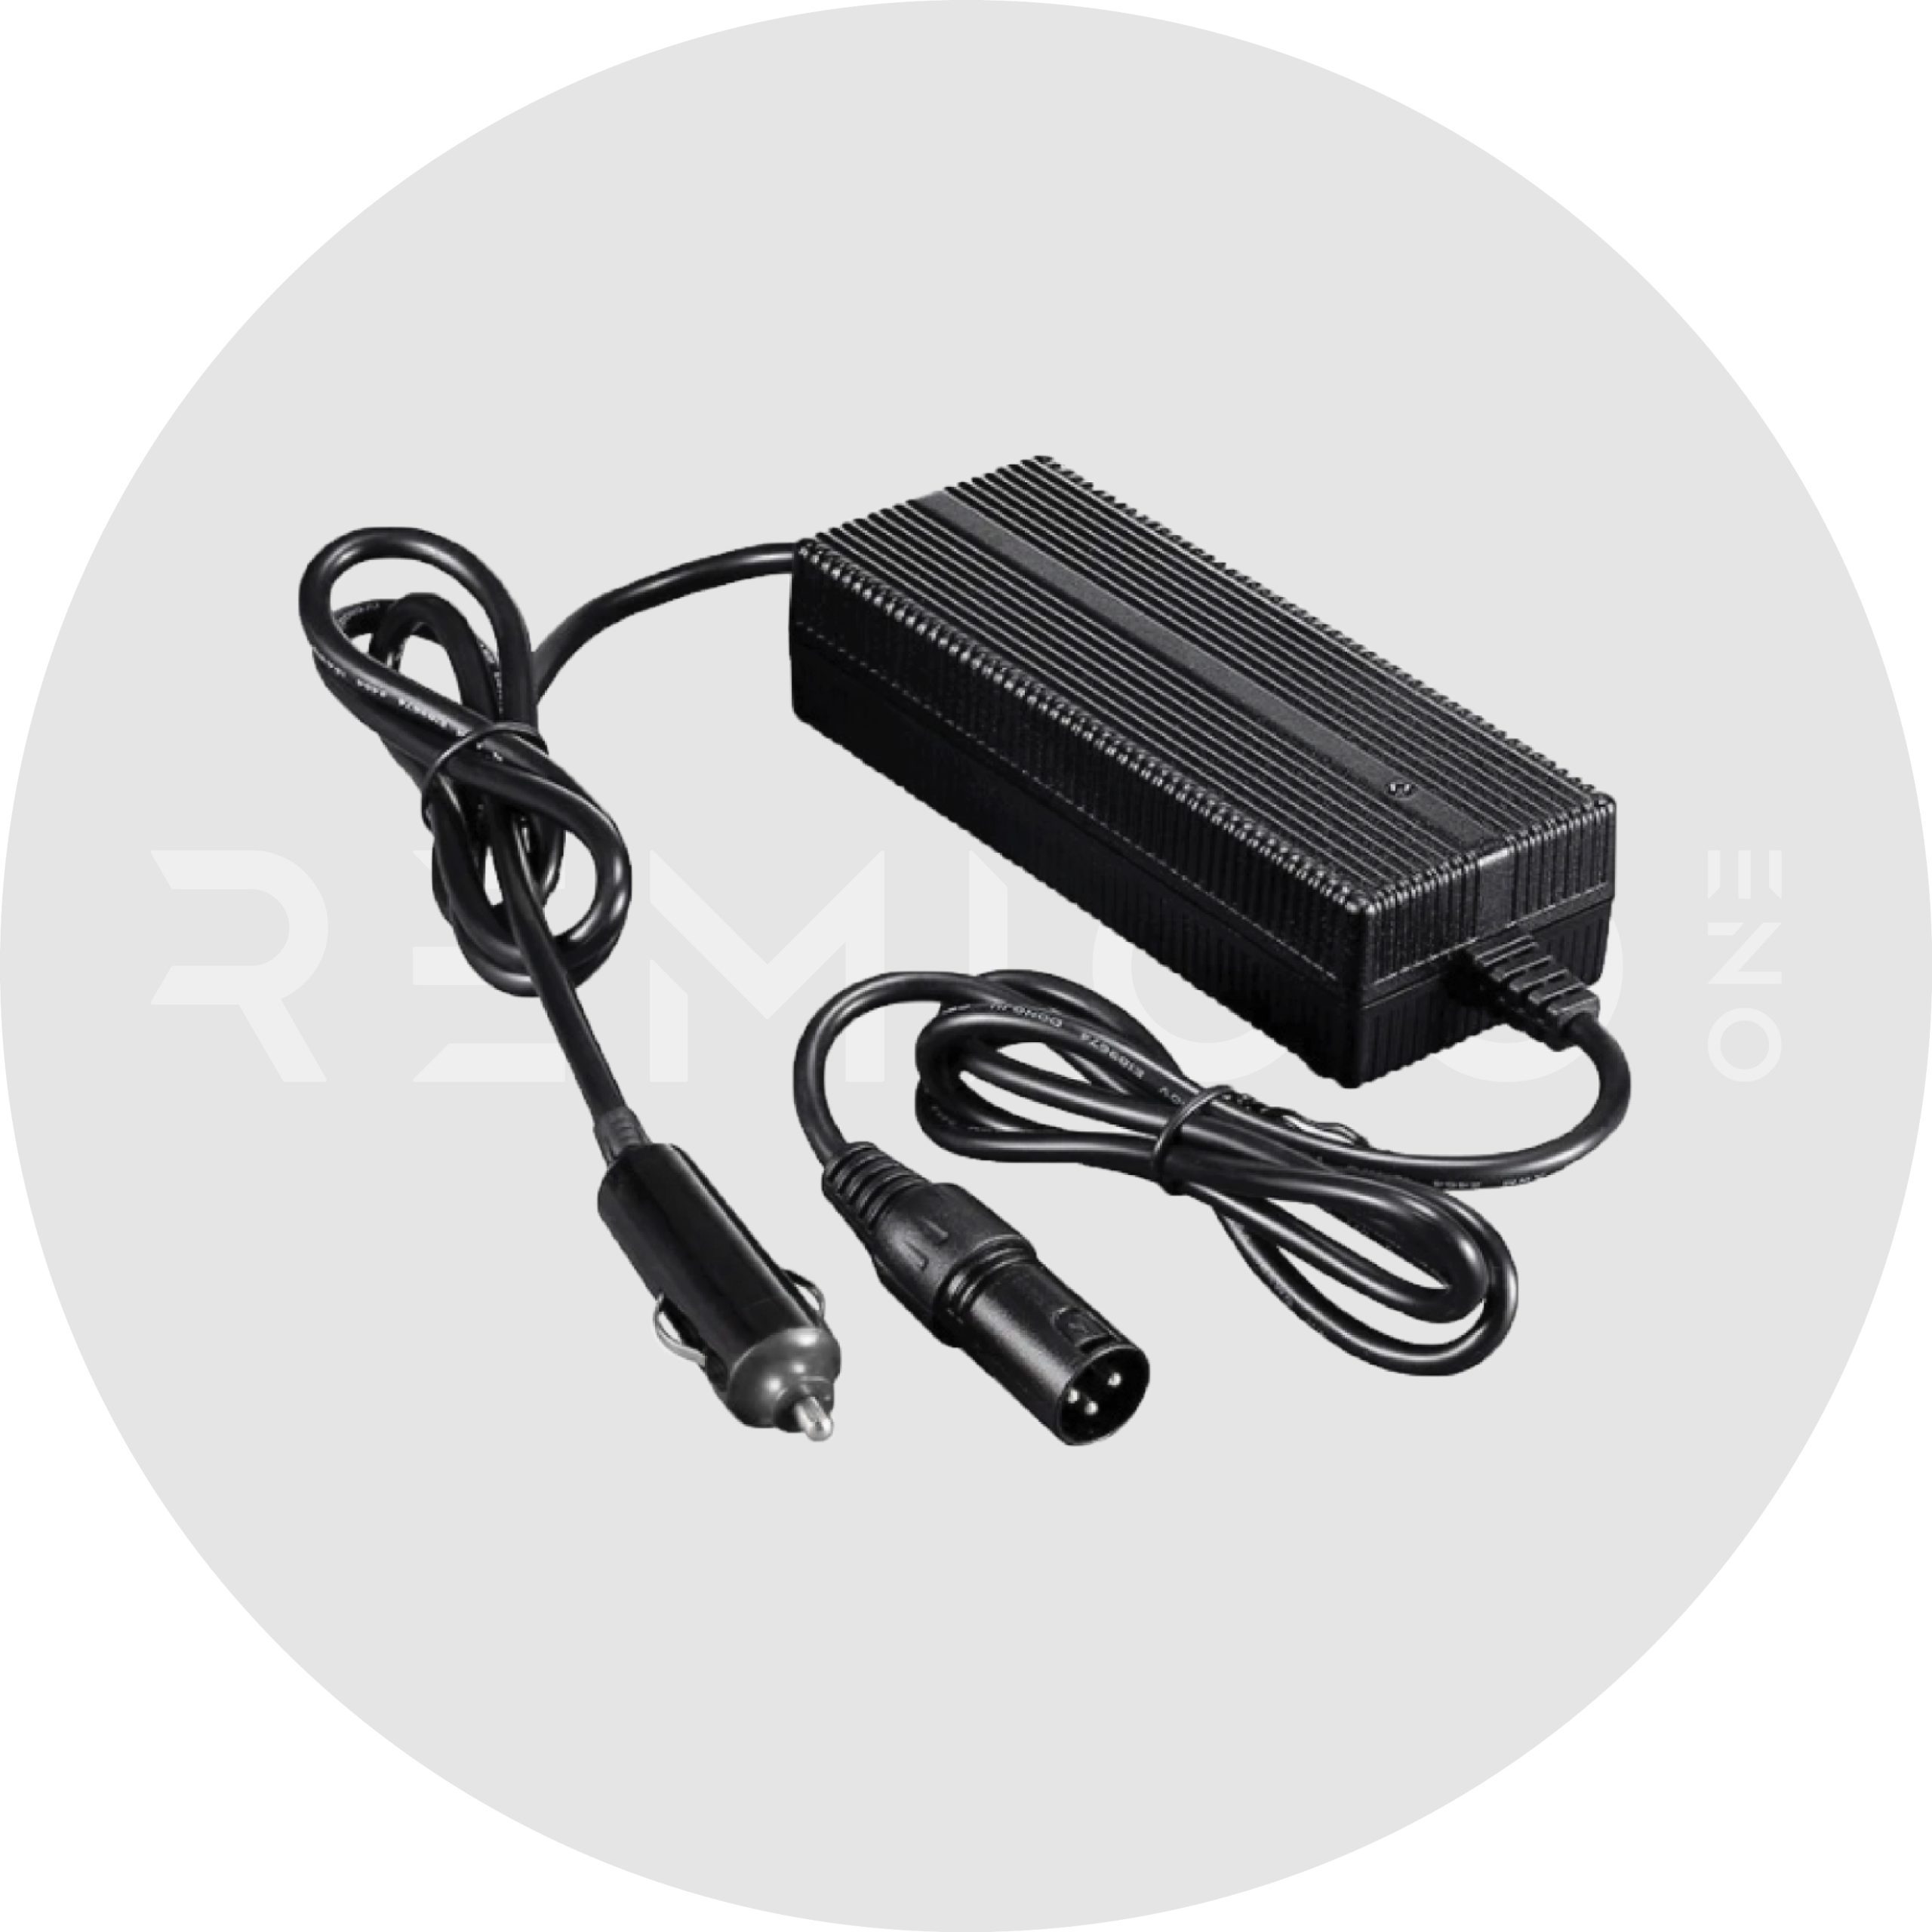 low voltage DC charger for an electric outboard RemigoOne on a gray branded background